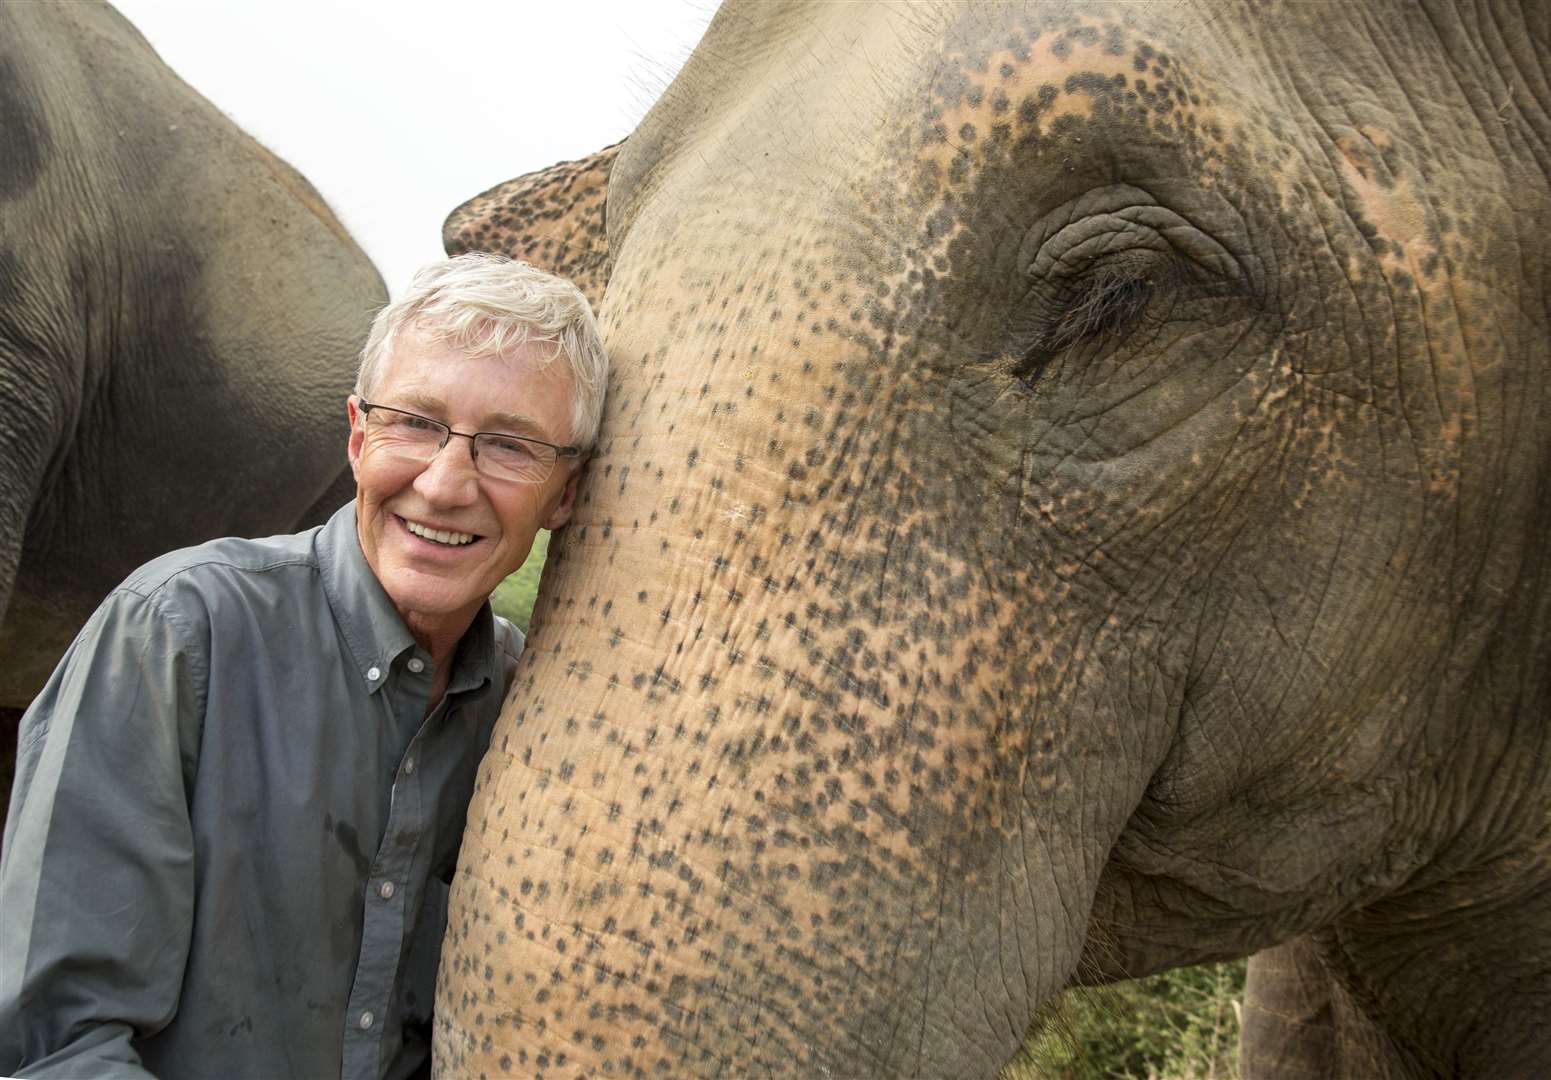 Paul O'Grady meets one of the elephants at the SOS Wildlife Sanctuary north of Delhi in India